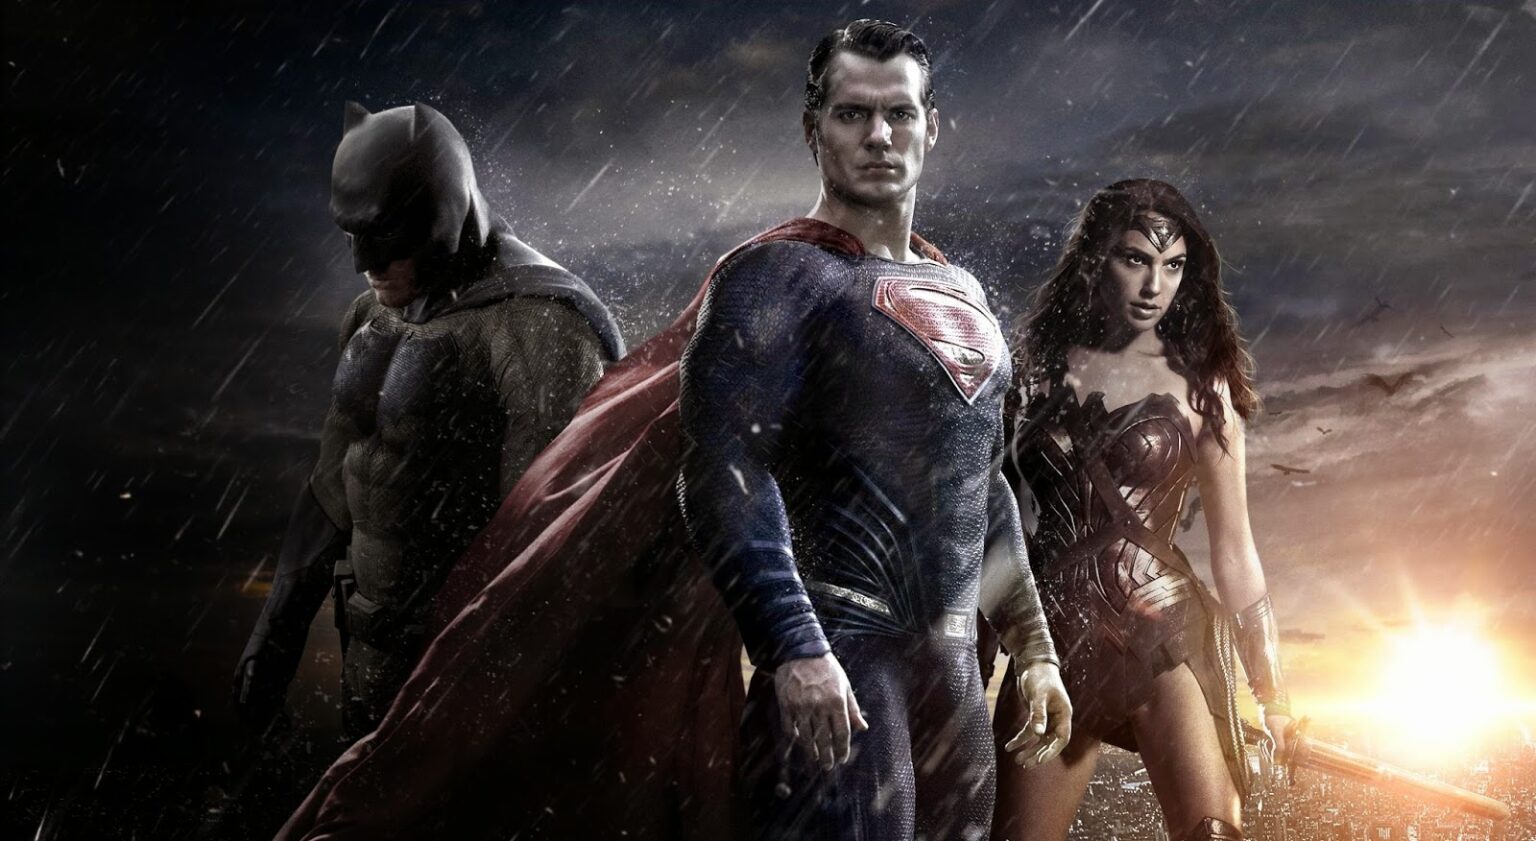 All Of Batman vs Superman Trailer Edited Into One Chronological Footage